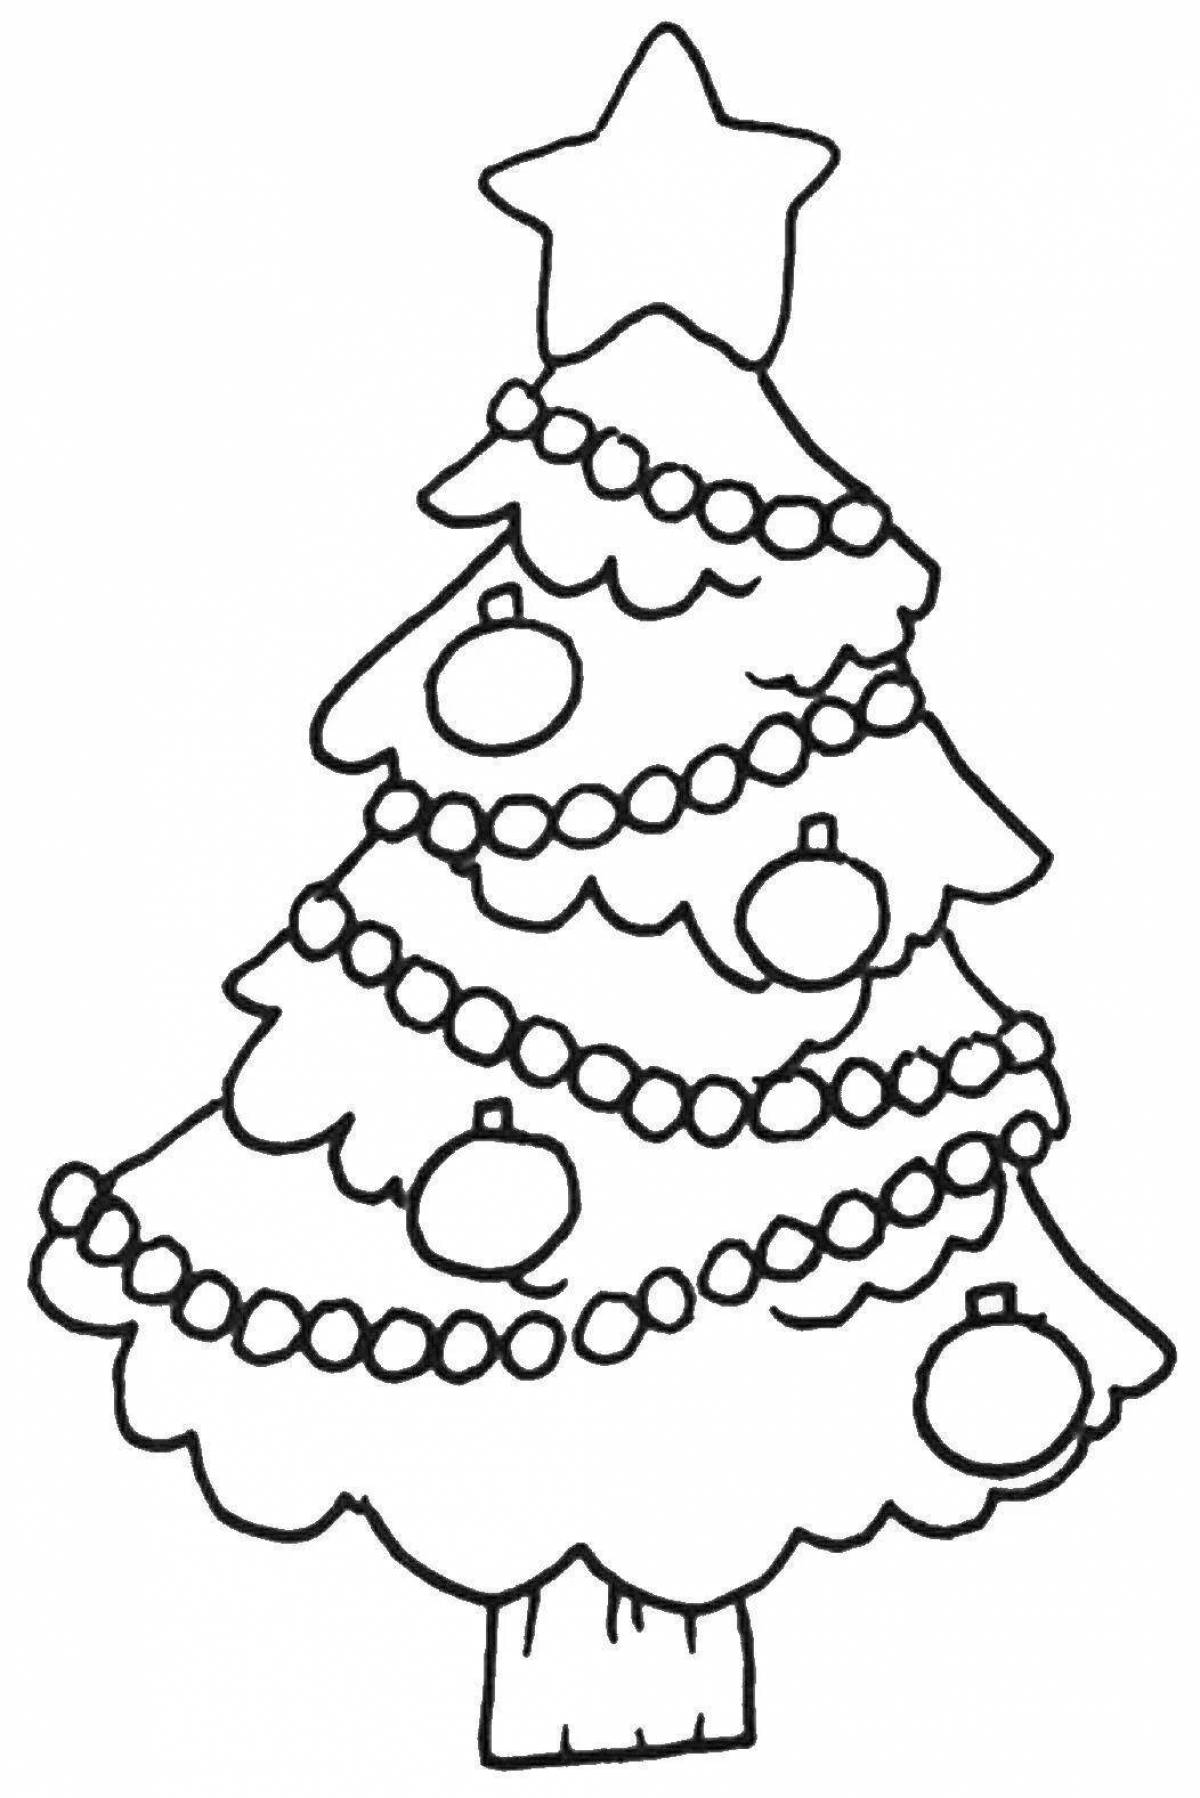 Fancy Christmas tree coloring page